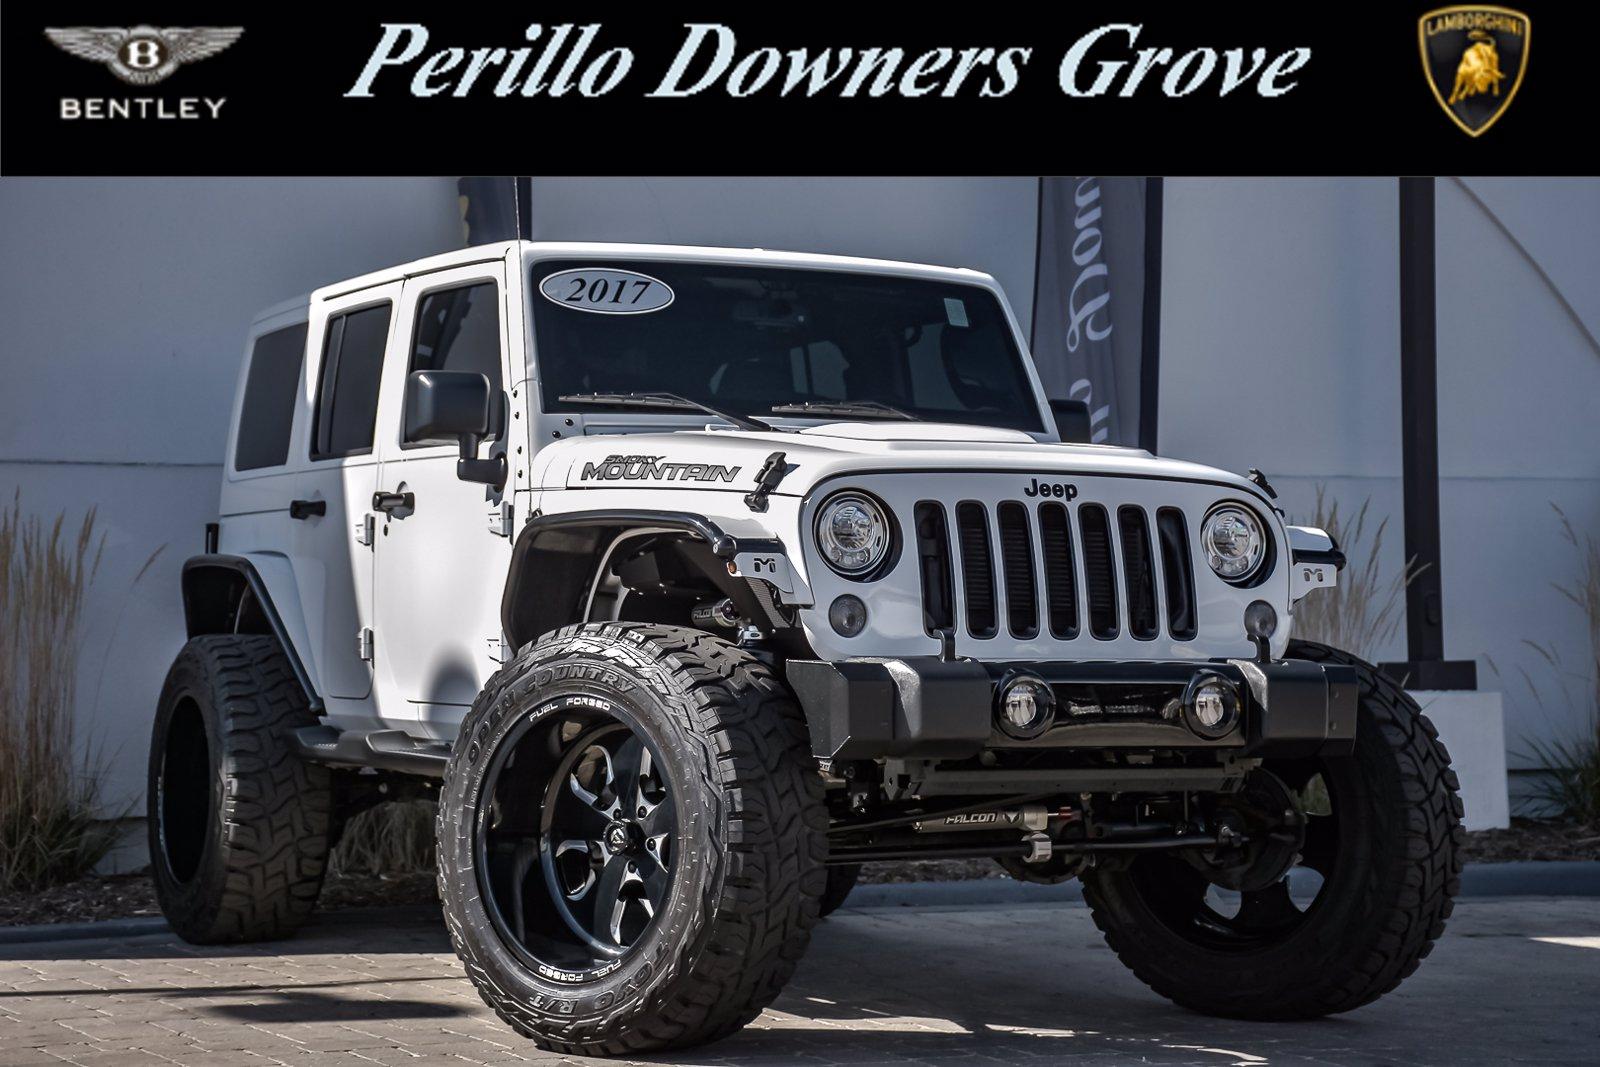 Used 2017 Jeep Wrangler Unlimited Smoky Mountain For Sale (Sold) | Bentley  Downers Grove Stock #DG2721A